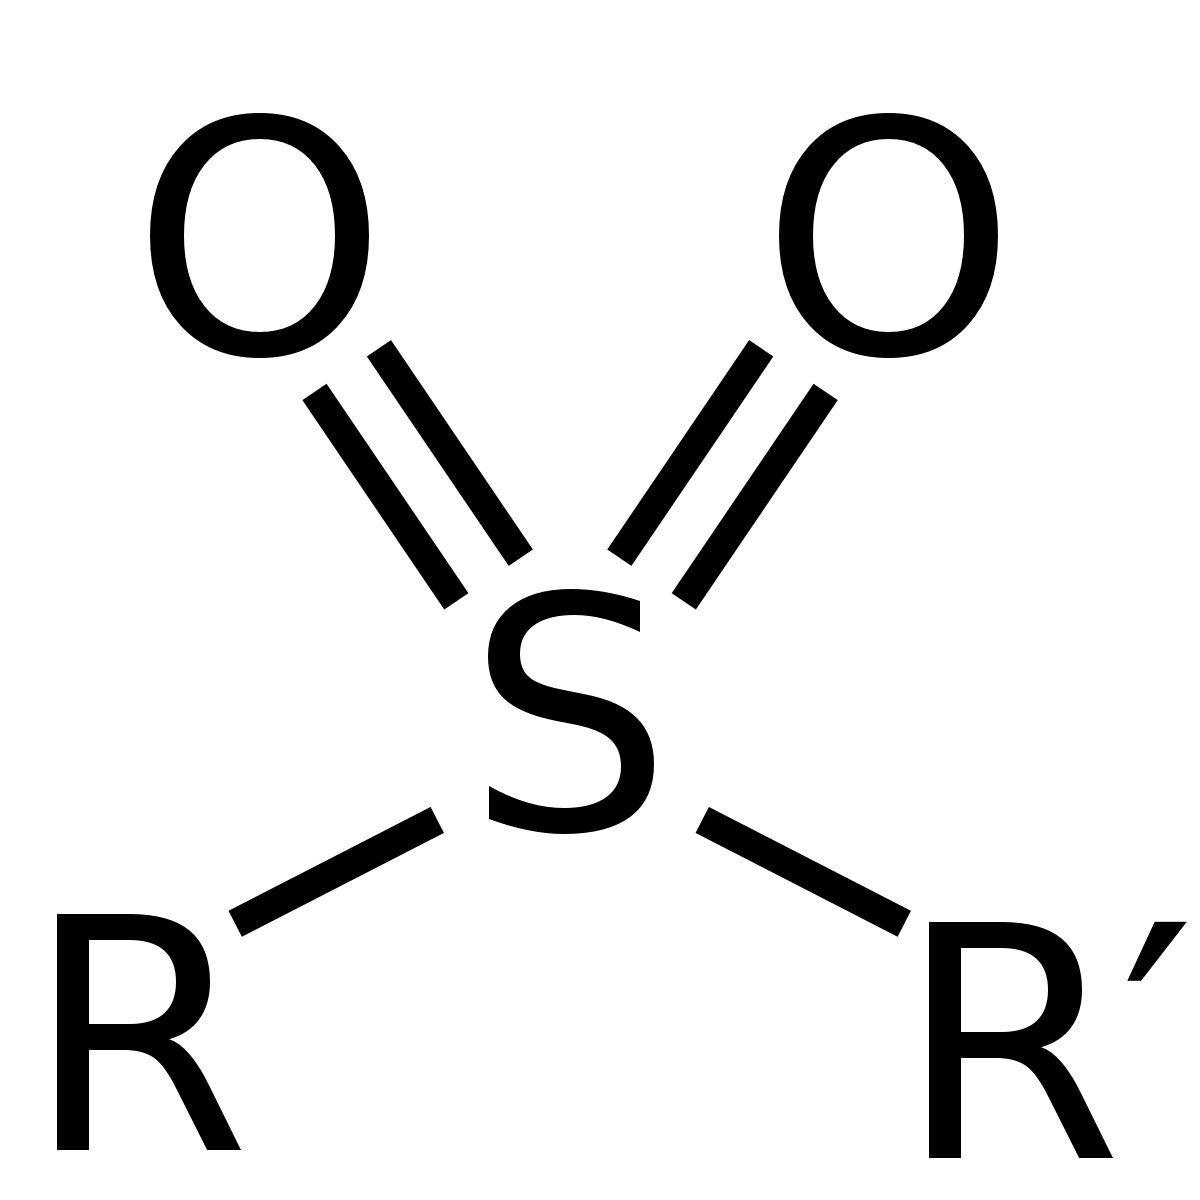 <p>Naming: (R) (R&apos;) sulfone with R and R&apos; in alphabetical order</p>